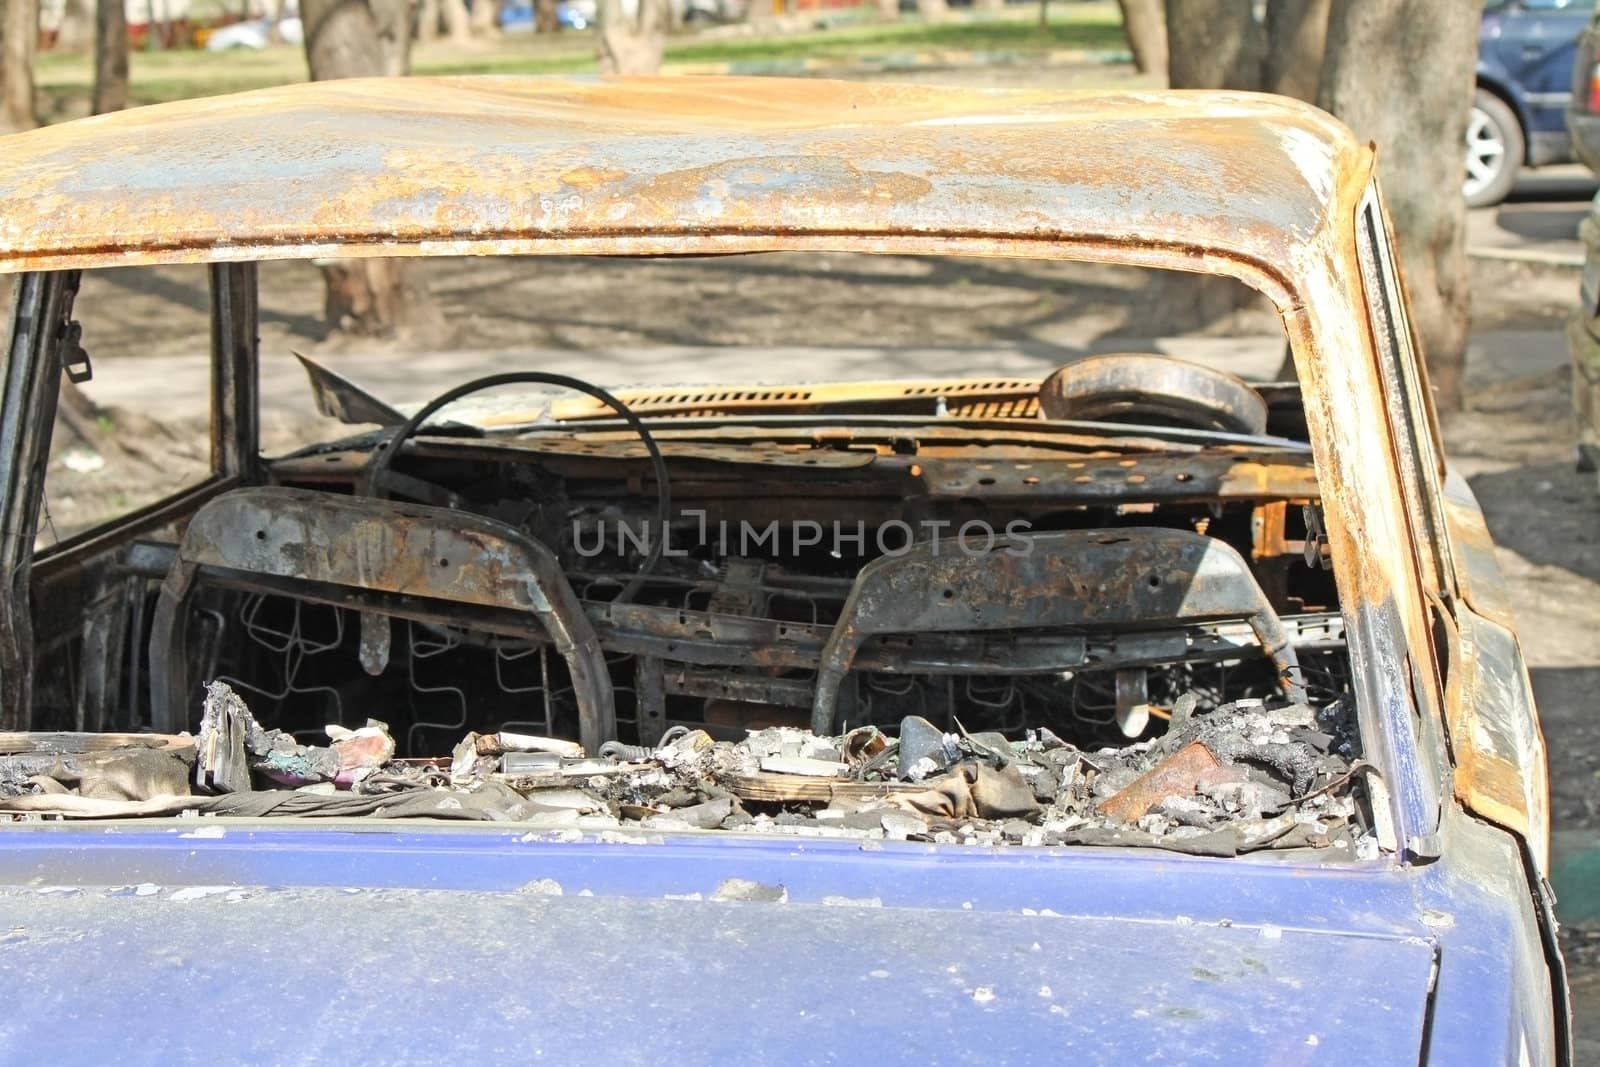 A fully burned car in the street